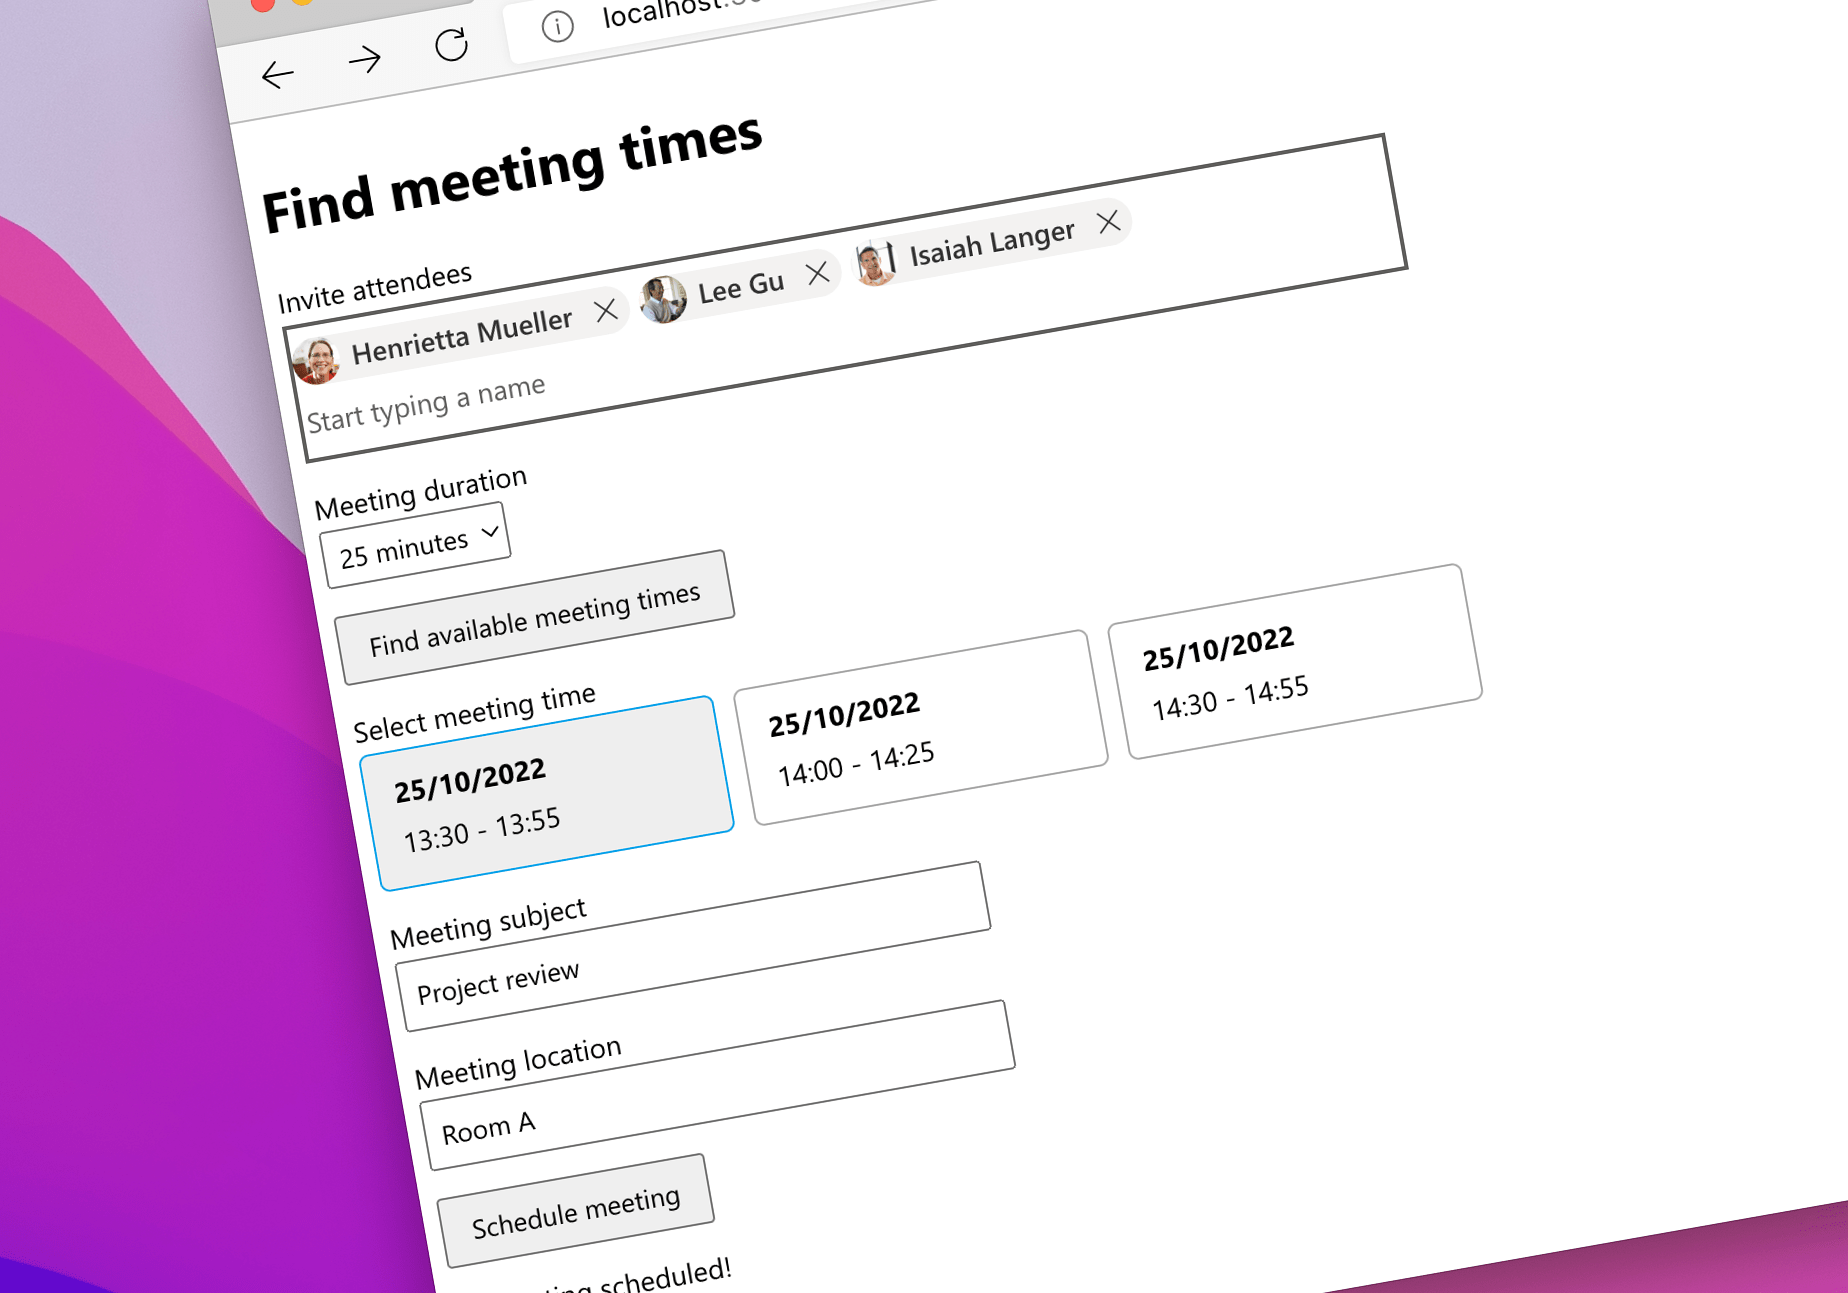 #65 Find meeting times and schedule a meeting using Microsoft Graph